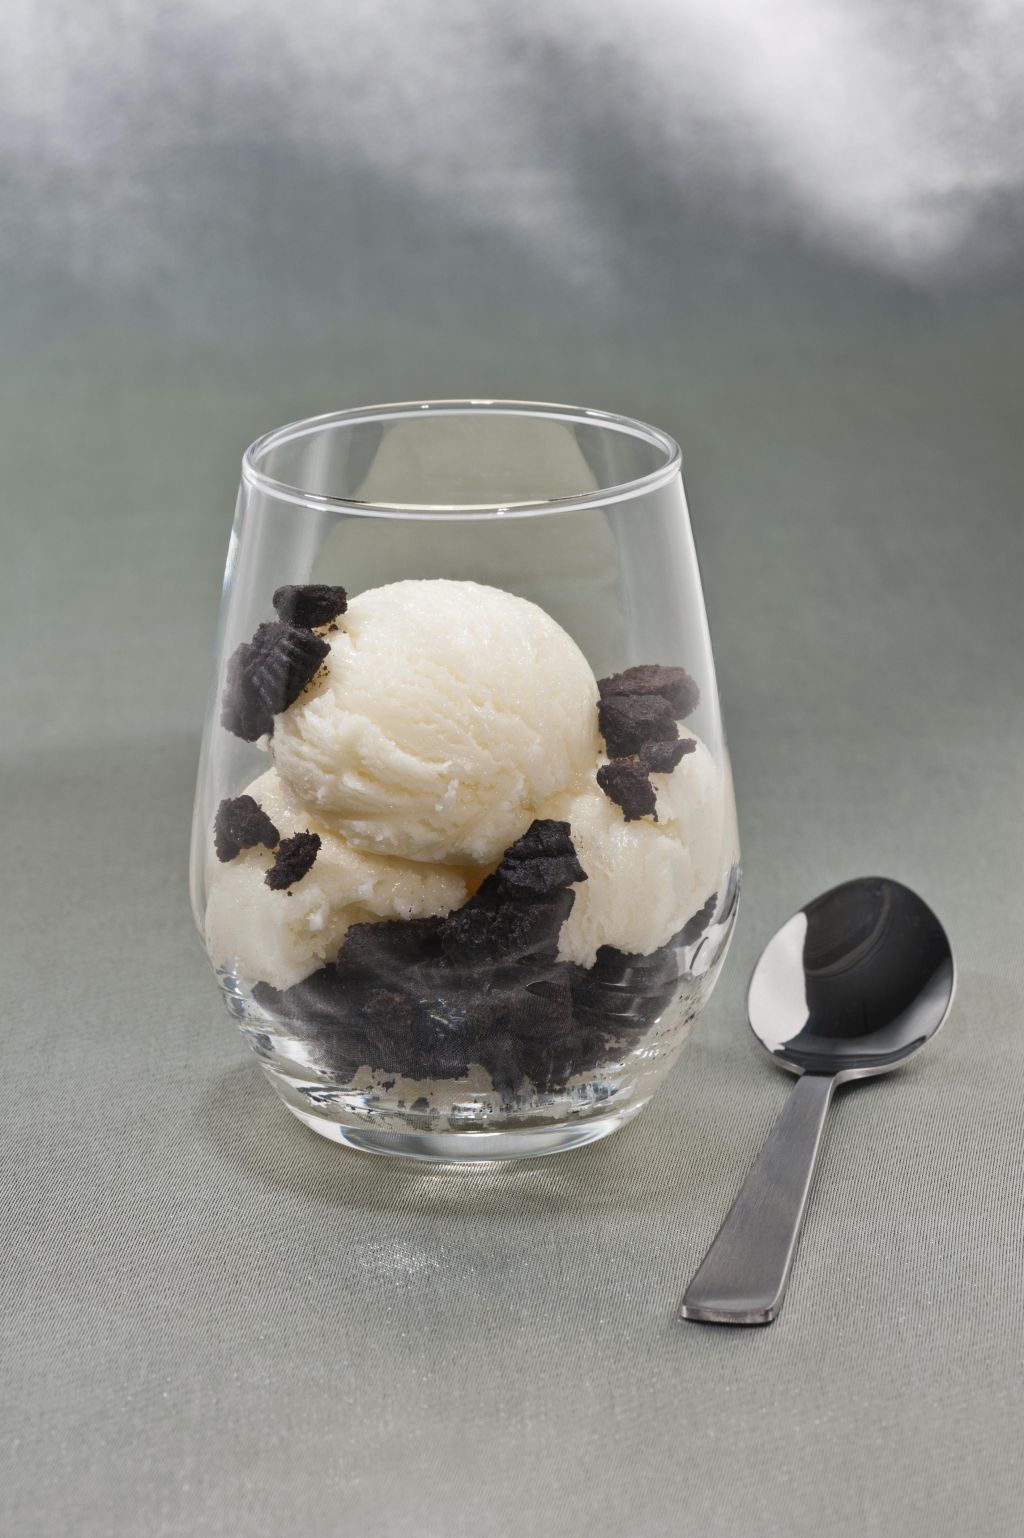 Cookies and Ice cream dessert in a glass